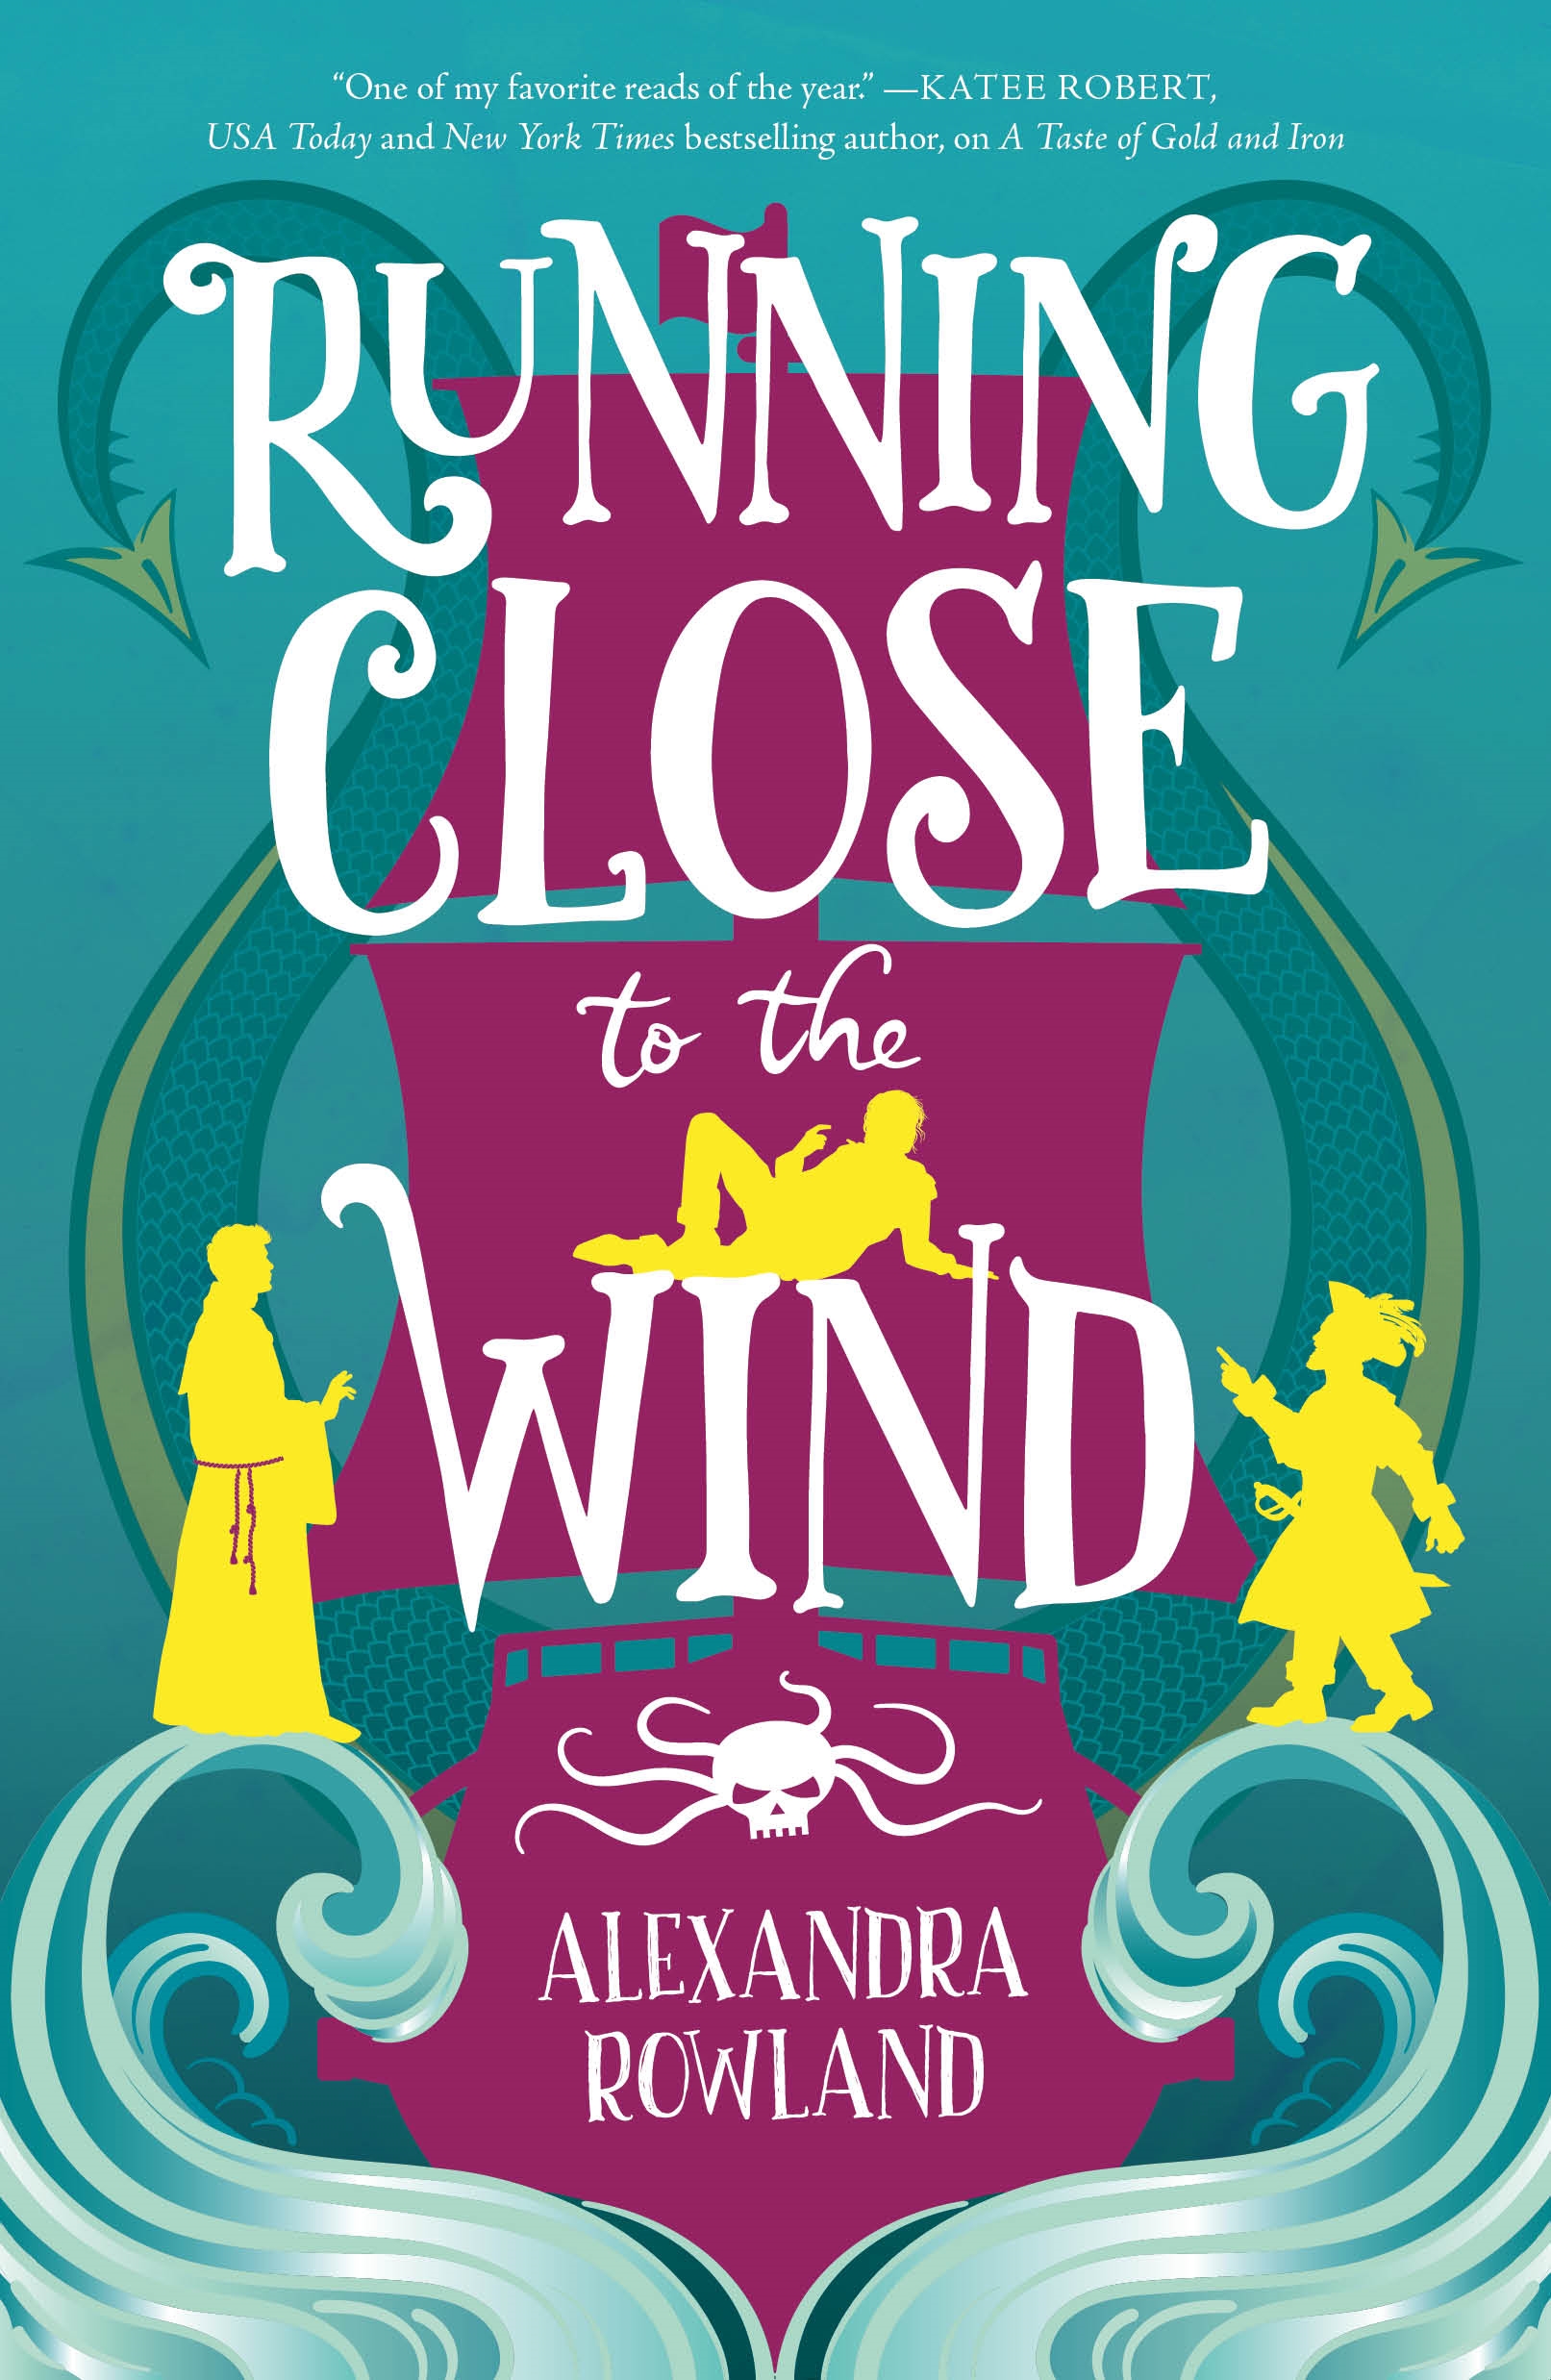 Running Close to the Wind by Alexandra Rowland